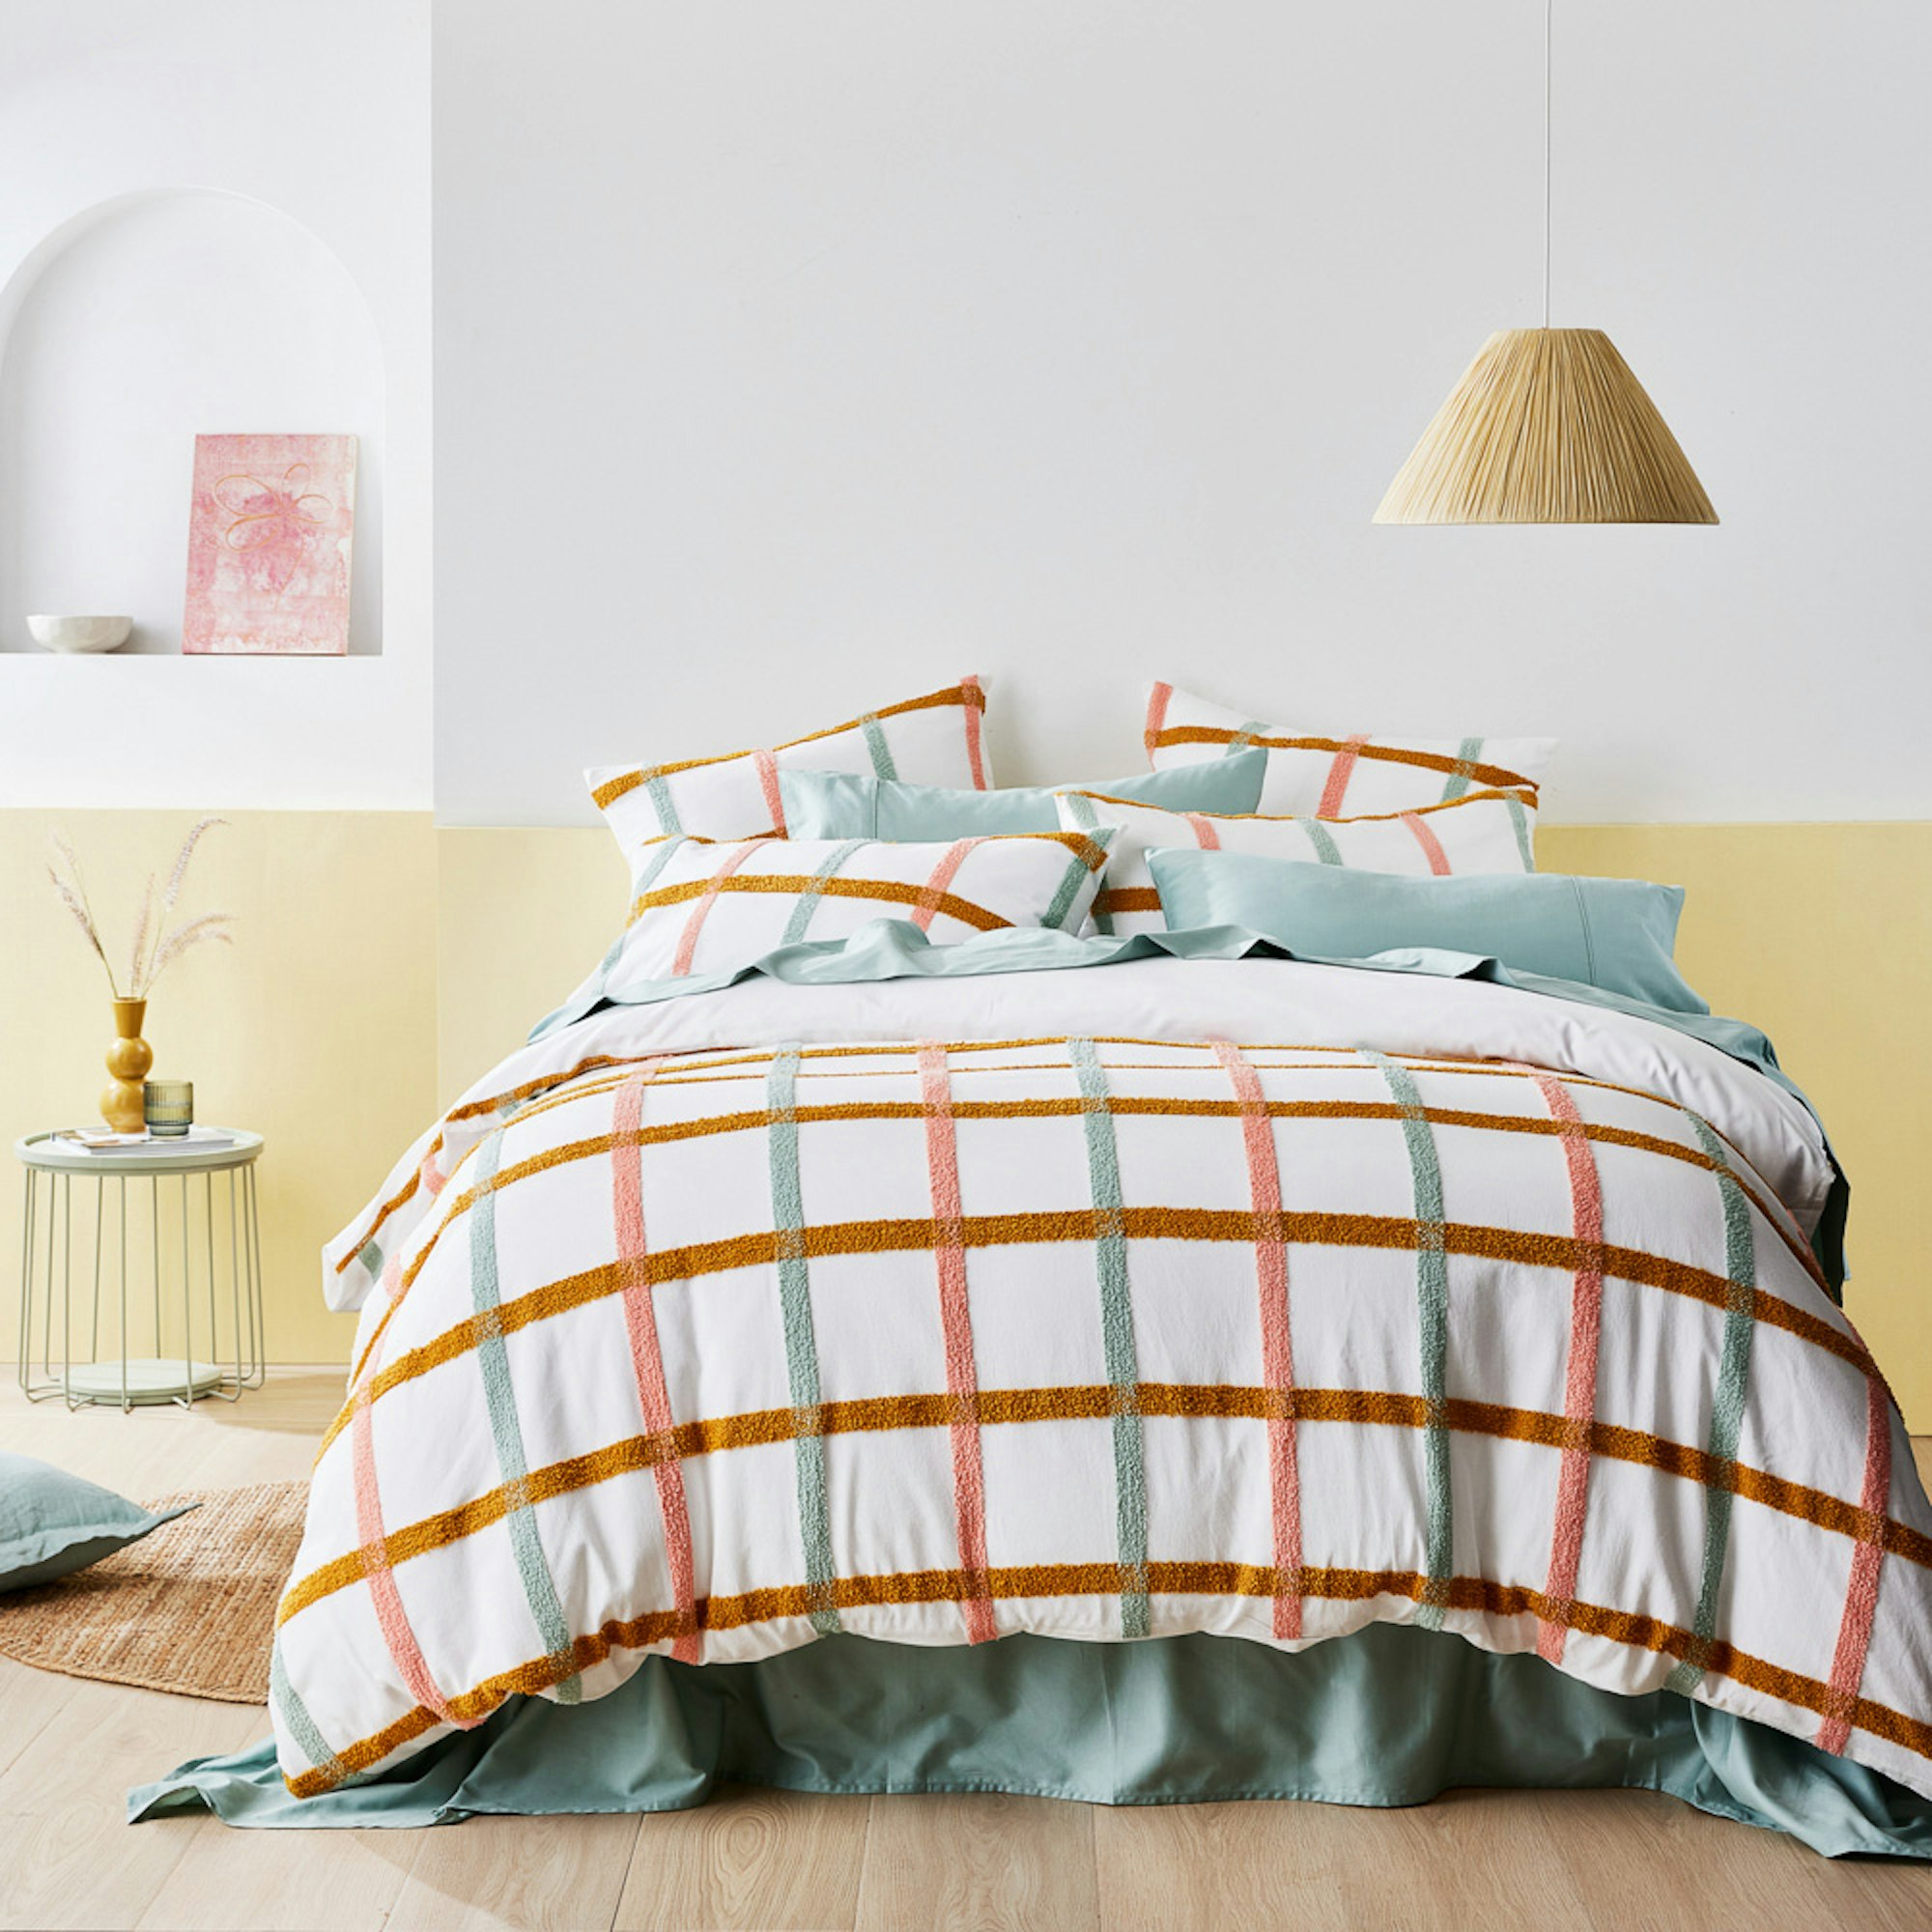 MyHouse SS23 collection. Full bedroom setting with White quilt cover with tufted check pattern in mint, pink, and gold.